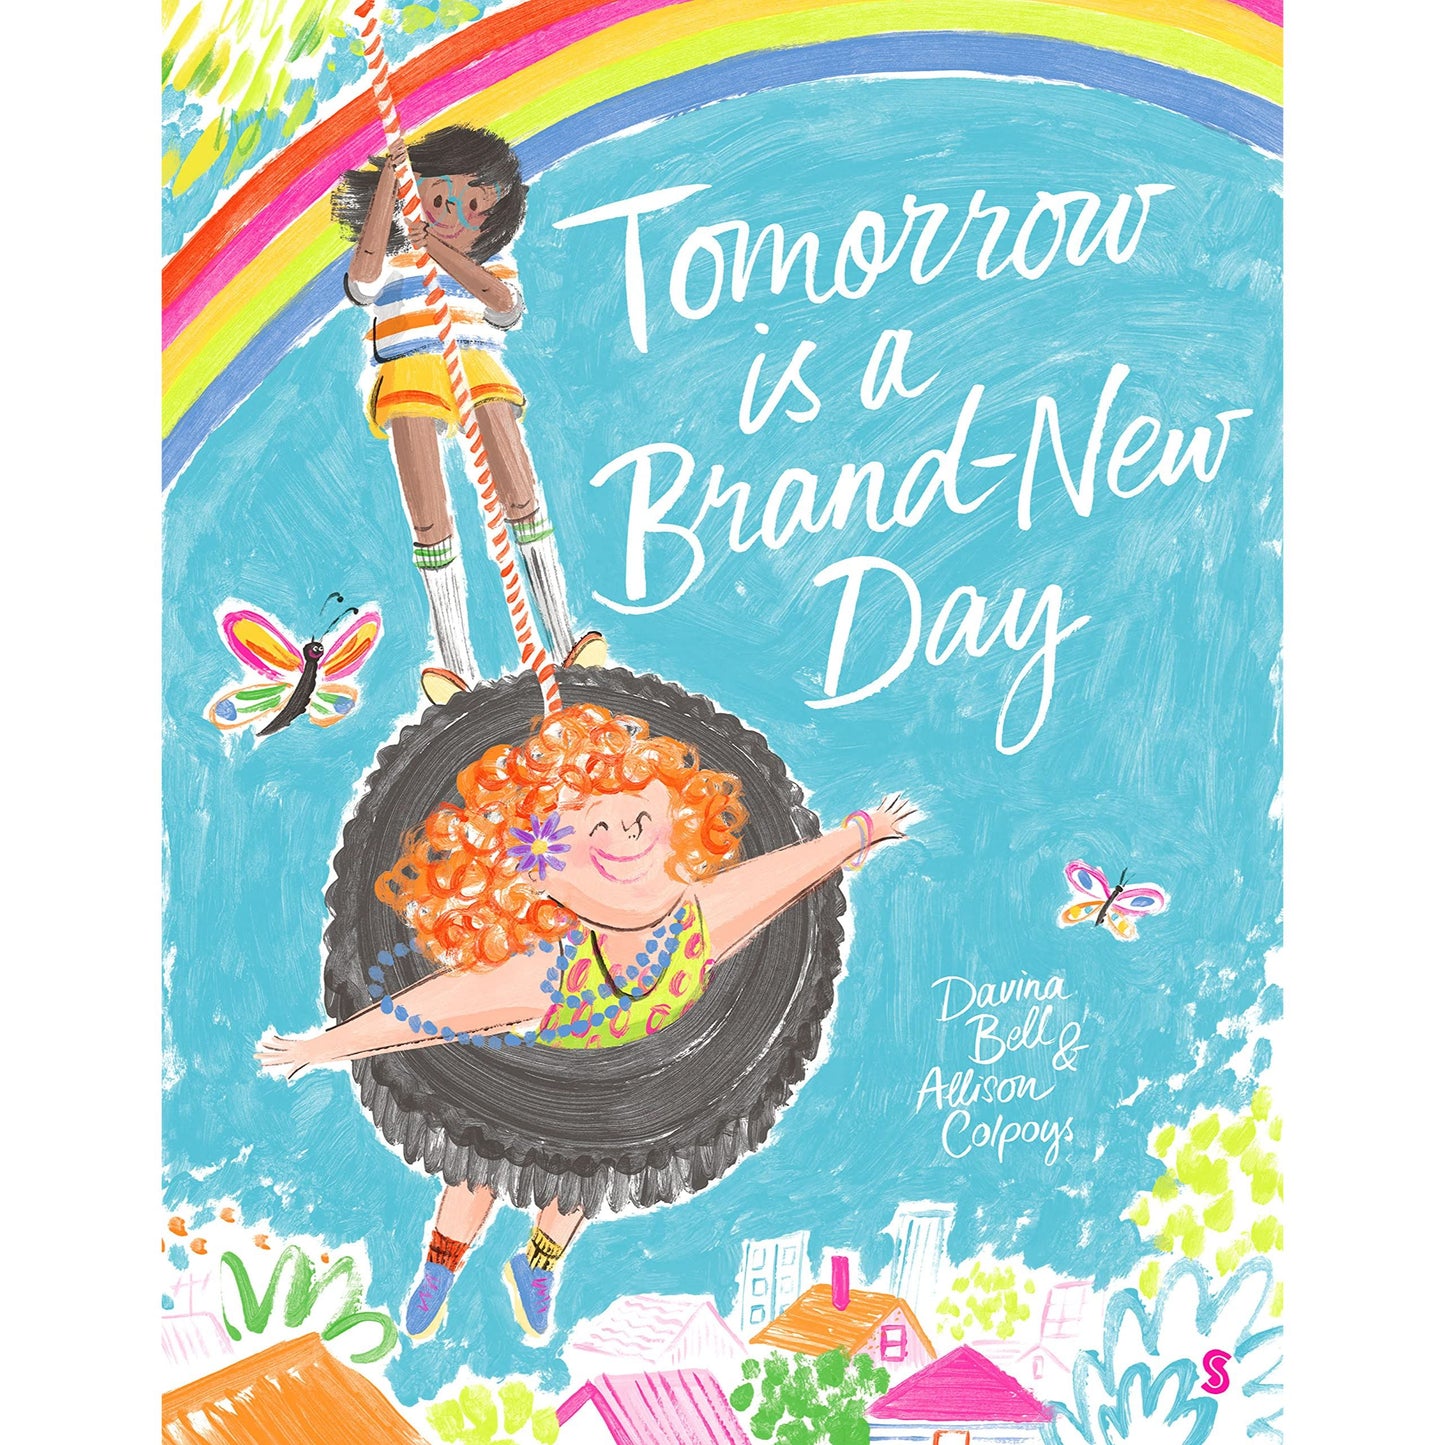 Tomorrow Is a Brand-new Day